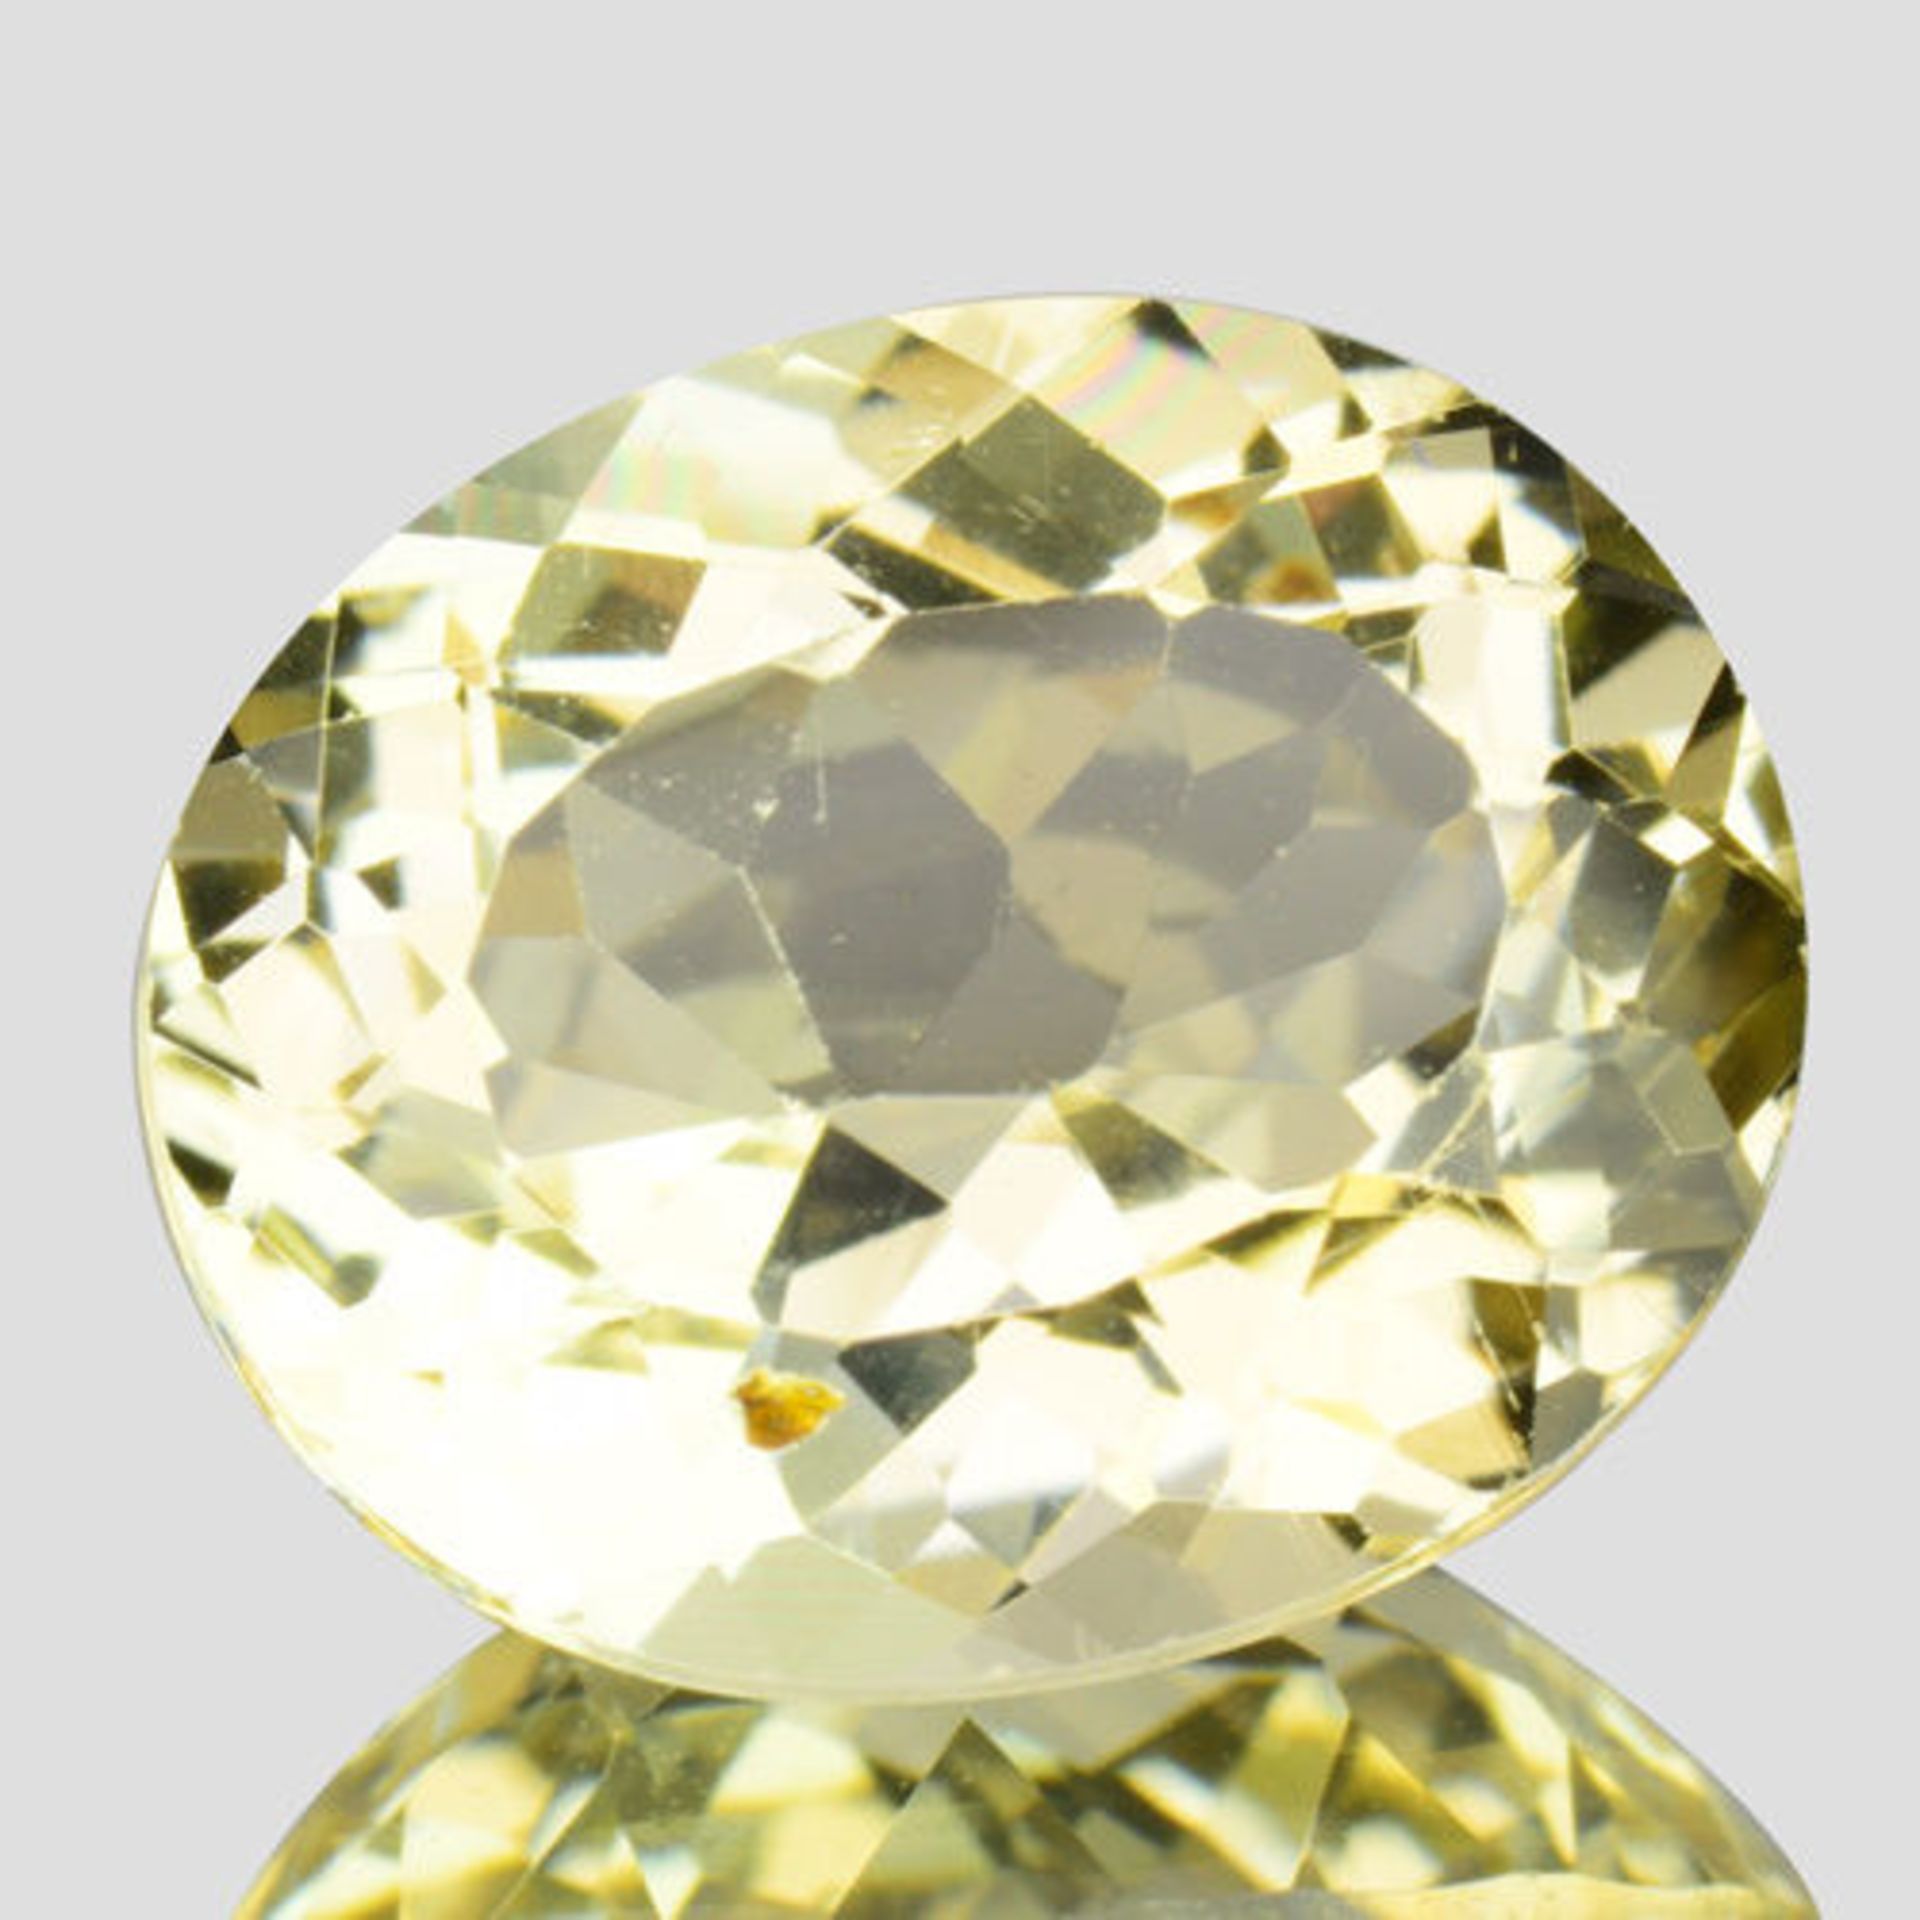 Adesine 4.70ct Gem With Certificate - Gem Valued At $206.93 (Approx £135.82)